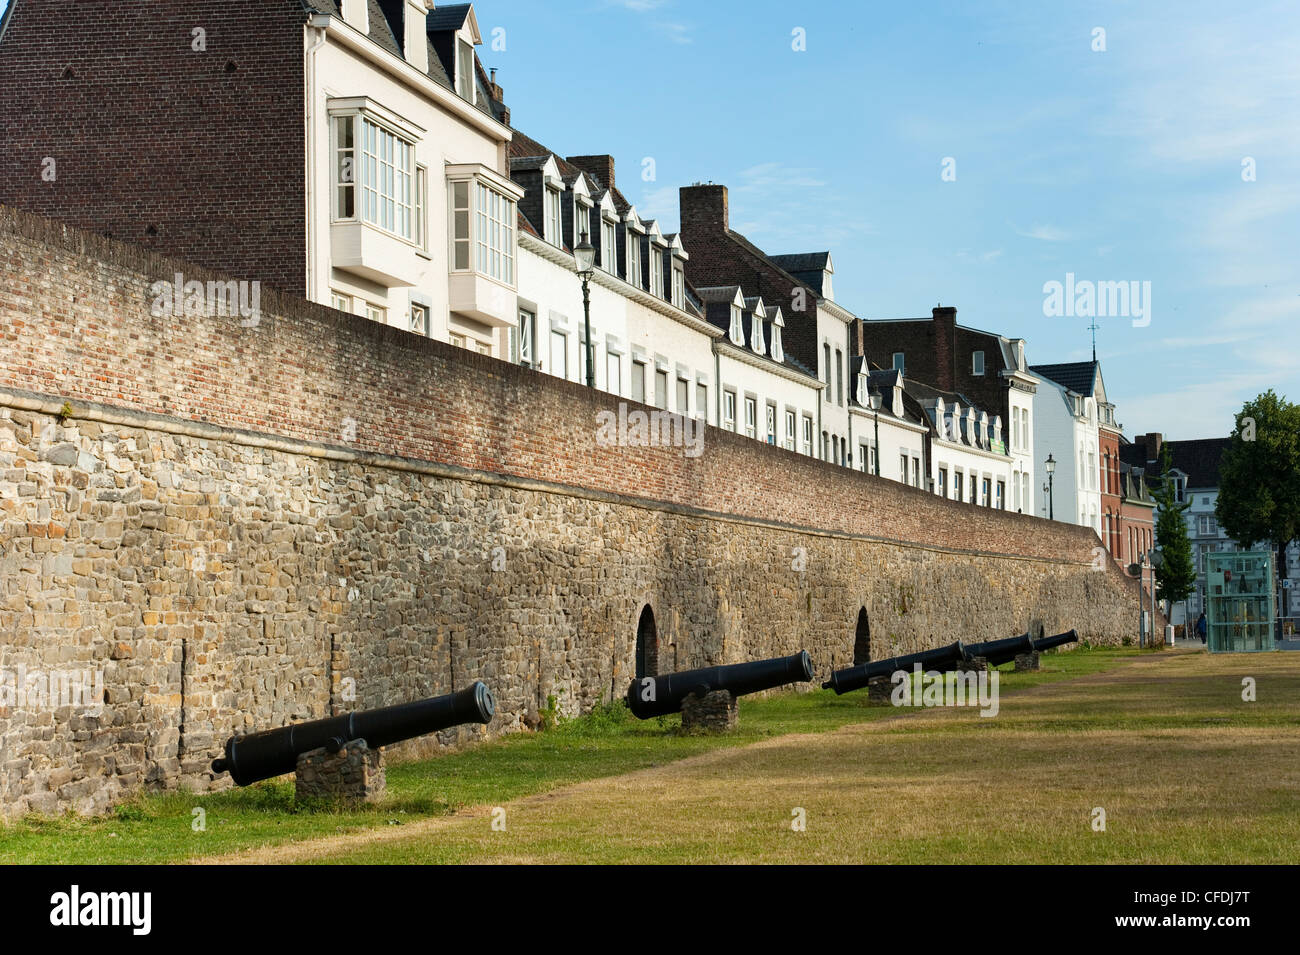 Eerste Middeleeuwse Omwalling (First Medieval City Wall), dating from 1229, Maastricht, Limburg, The Netherlands, Europe Stock Photo